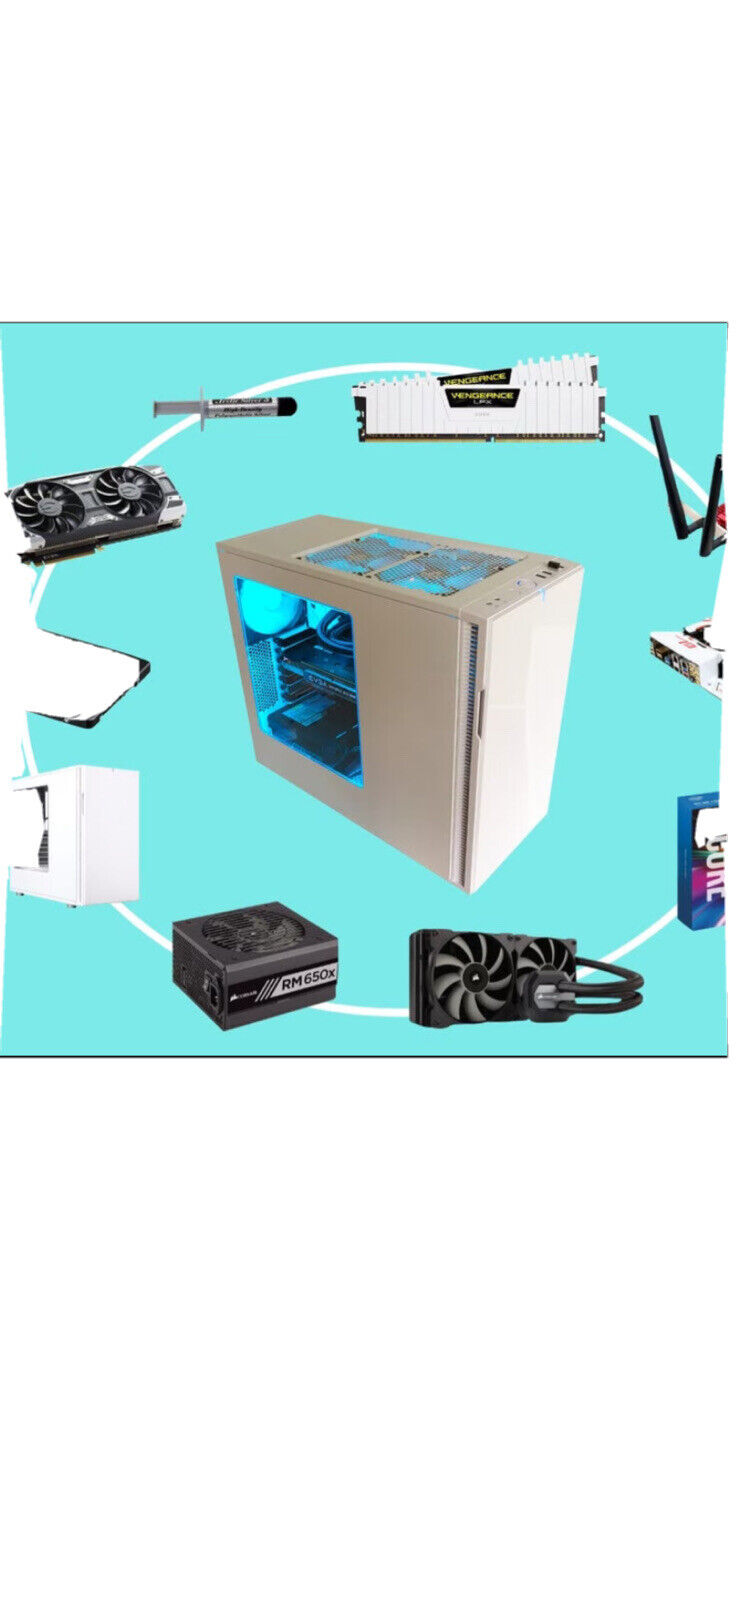 Find/build your own computer/Workstation(I’m Not Scamming U)